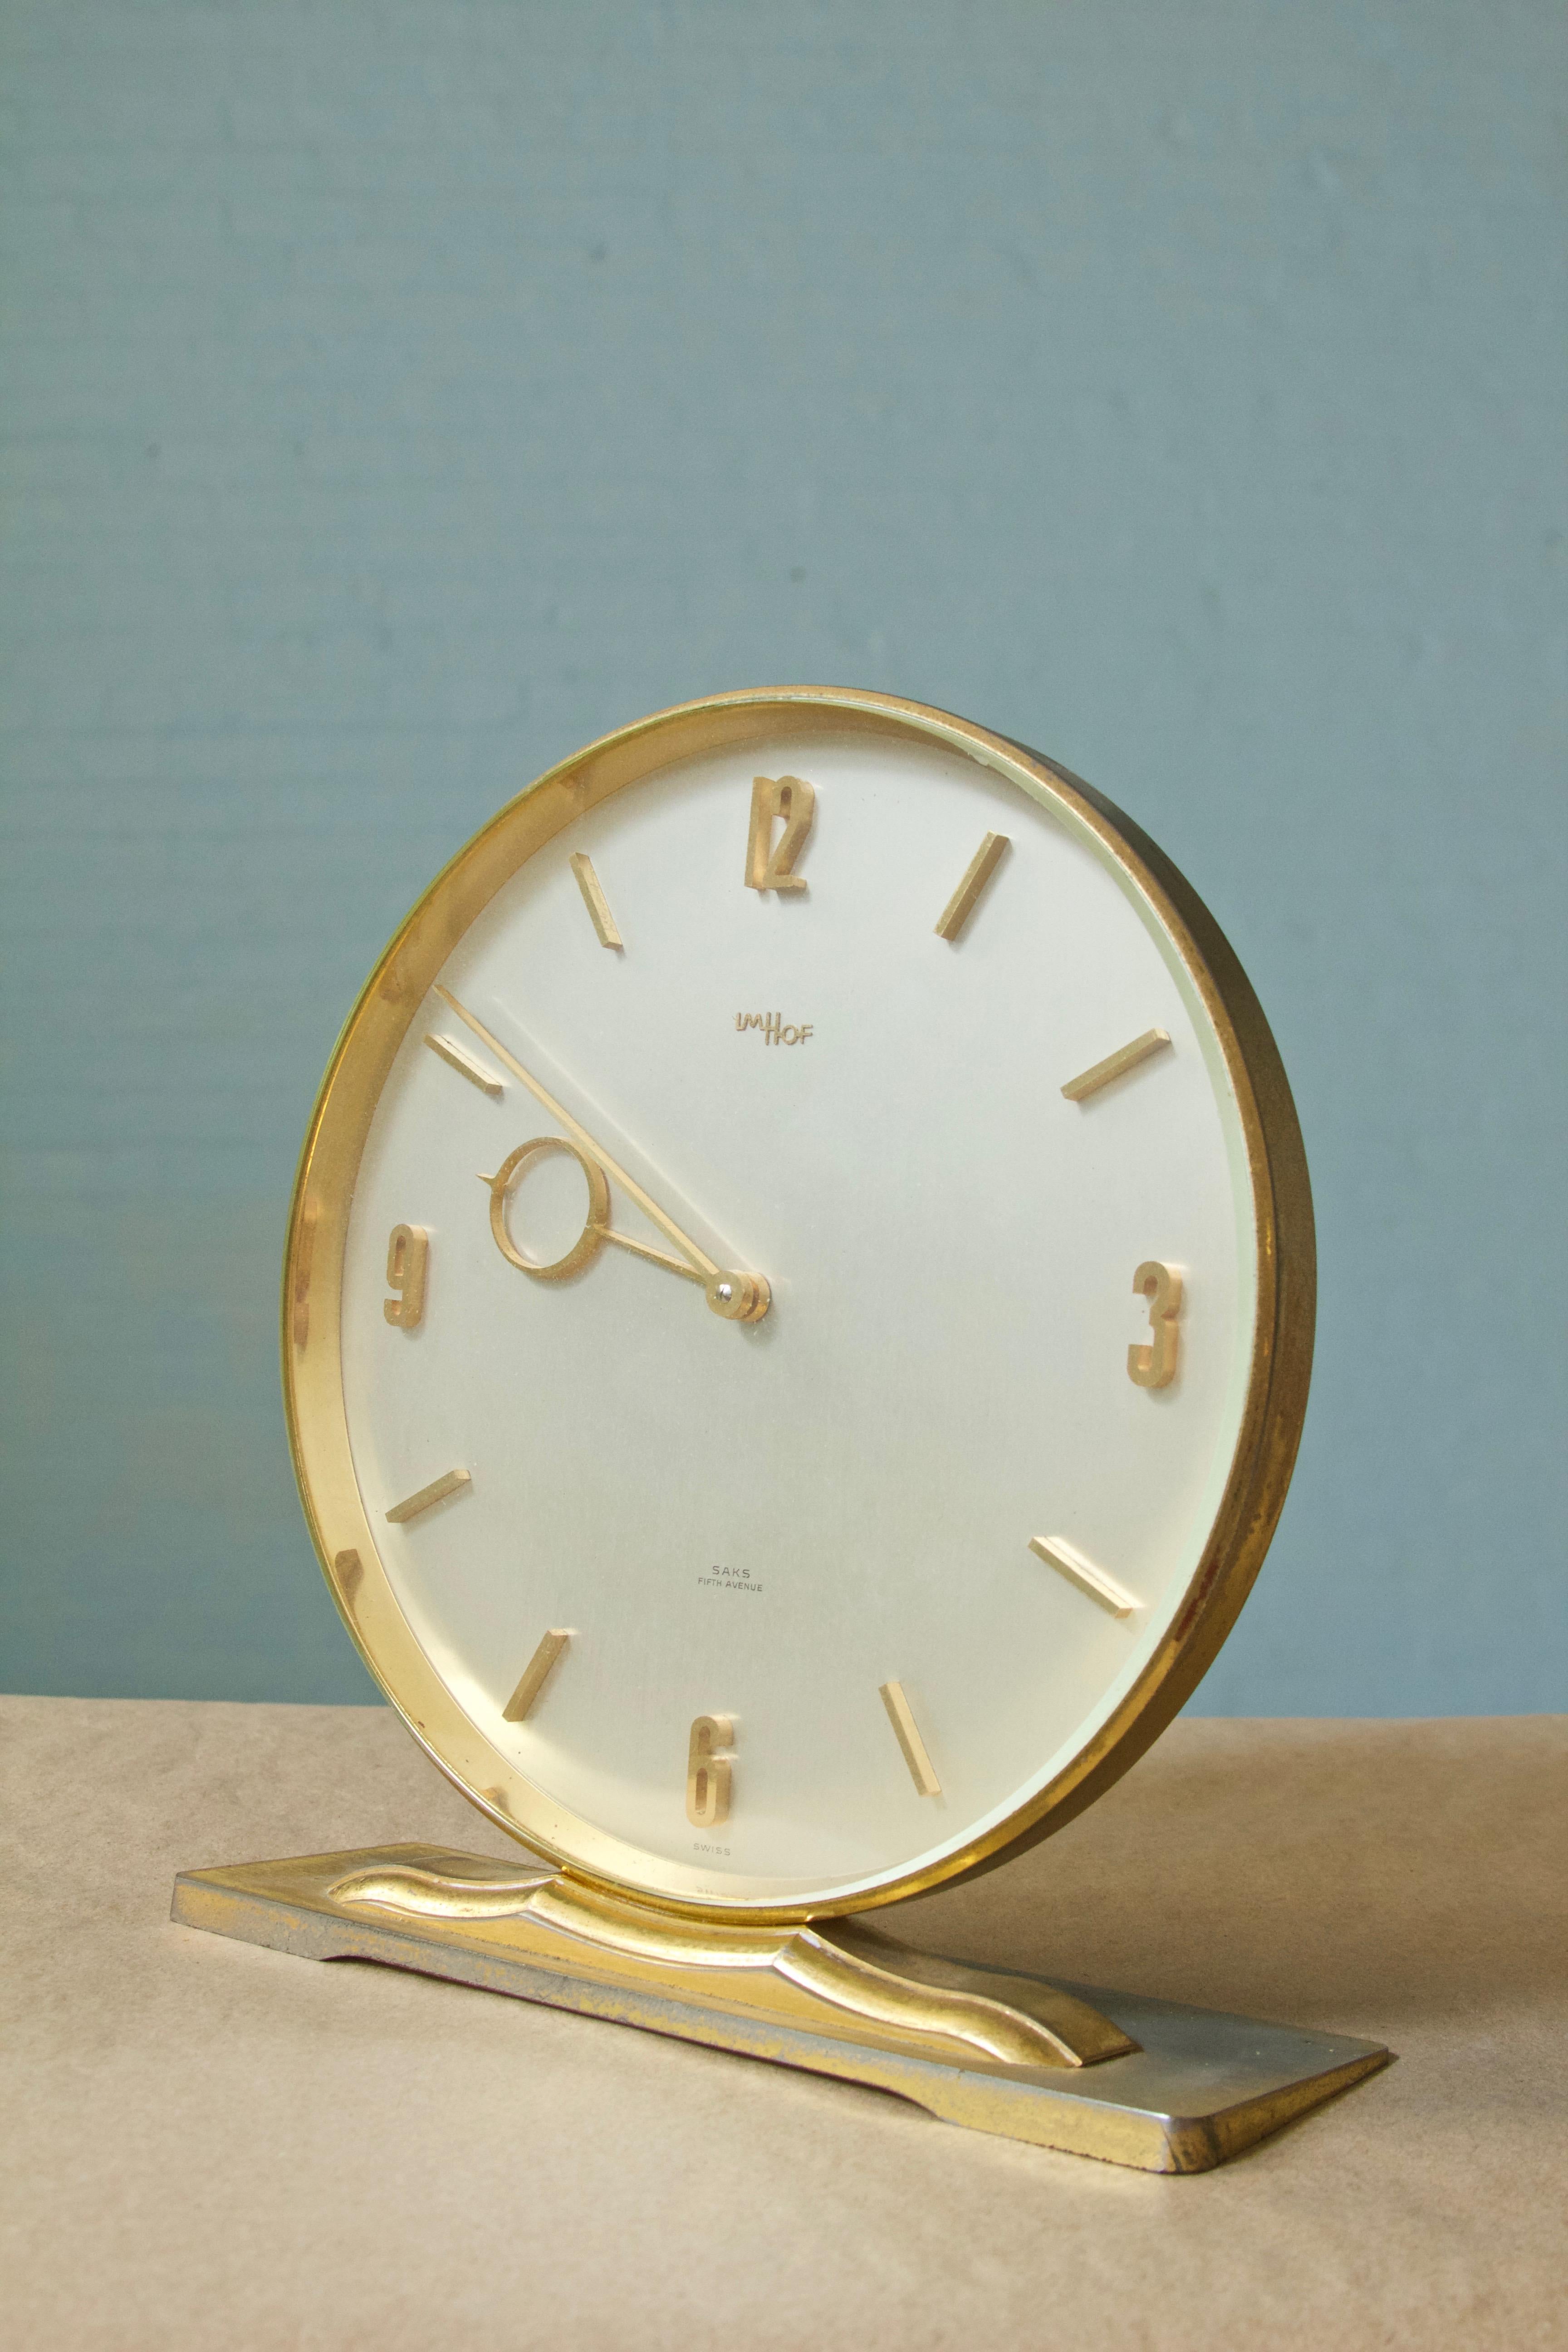 Stately, two-handed, Swiss 15 jewel, 8 day winding desk clock manufactured by Imhof for Saks Fifth Avenue- early 1960s.
Polished brass, splayed circular clock face, with applied solid brass time indicators. Imhof, a maker regarded as 